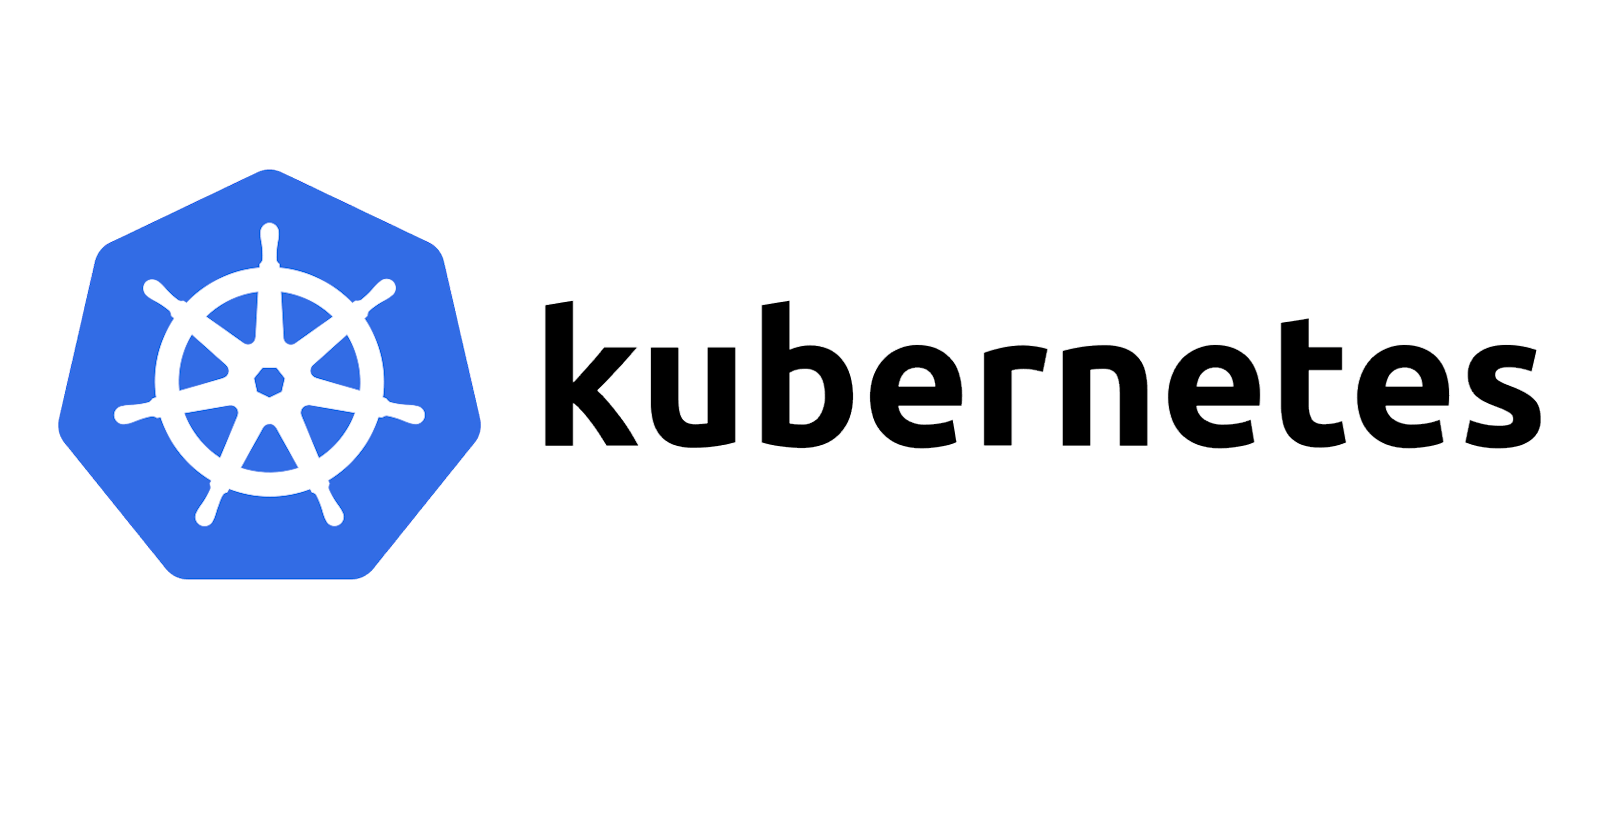 Why you should use Kubernetes for your enterprise software?